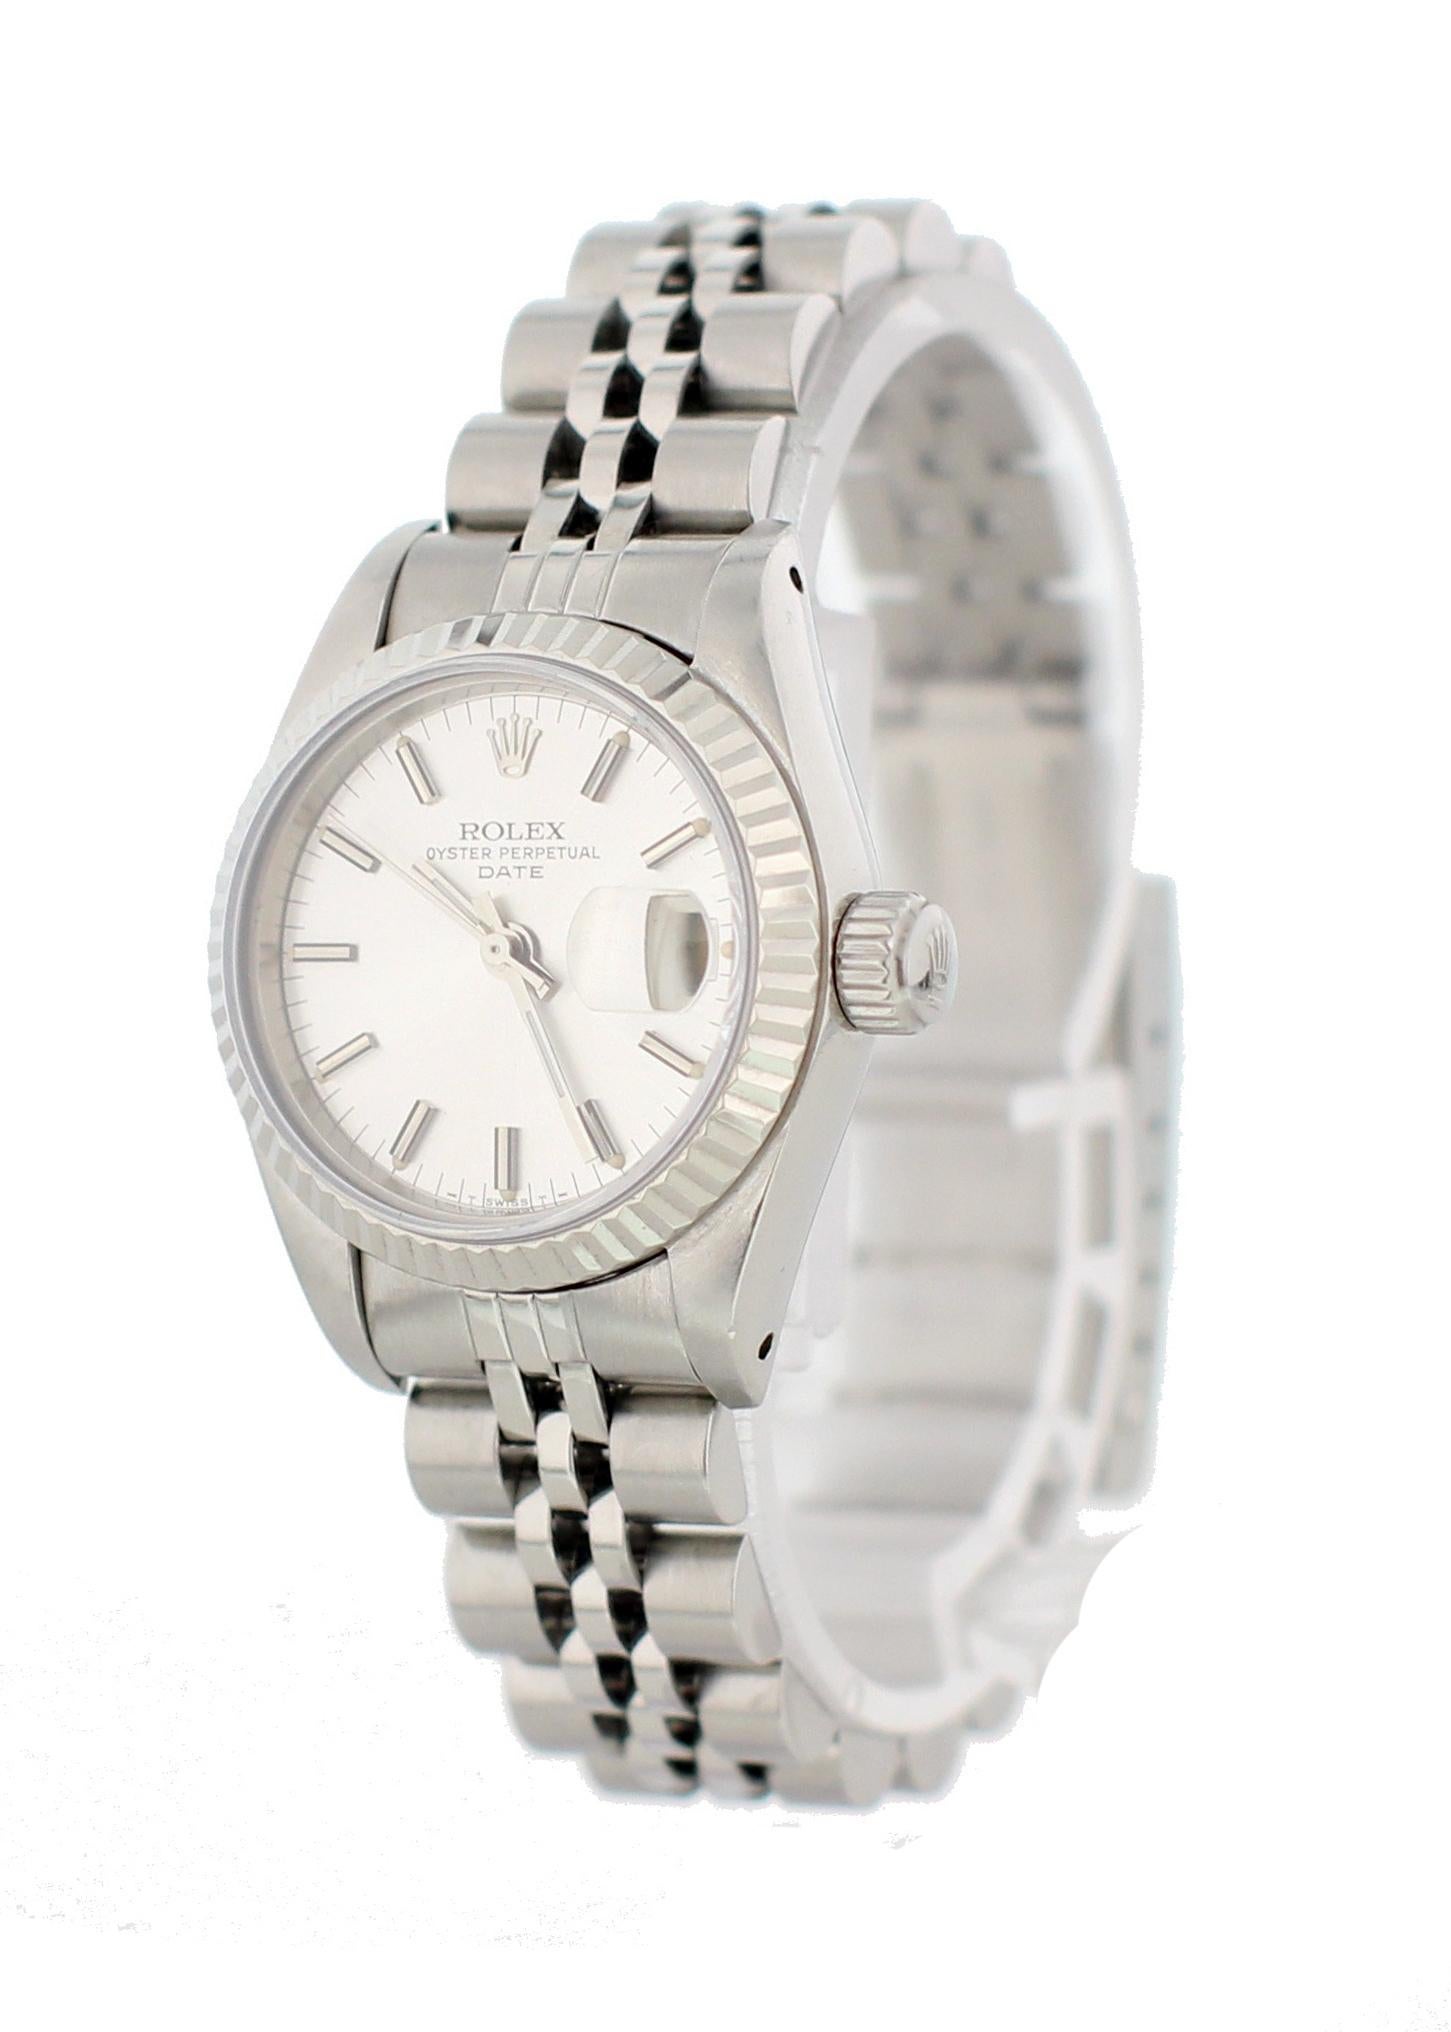 Rolex Oyster Perpetual Datejust 69174 Ladies Watch. 26mm stainless steel case. 18k white gold fluted bezel. Silver dial with steel hands and stick hands. Luminous hands and indexes. Date Display by the 3 o'clock. Stainless steel Jubilee band. Will